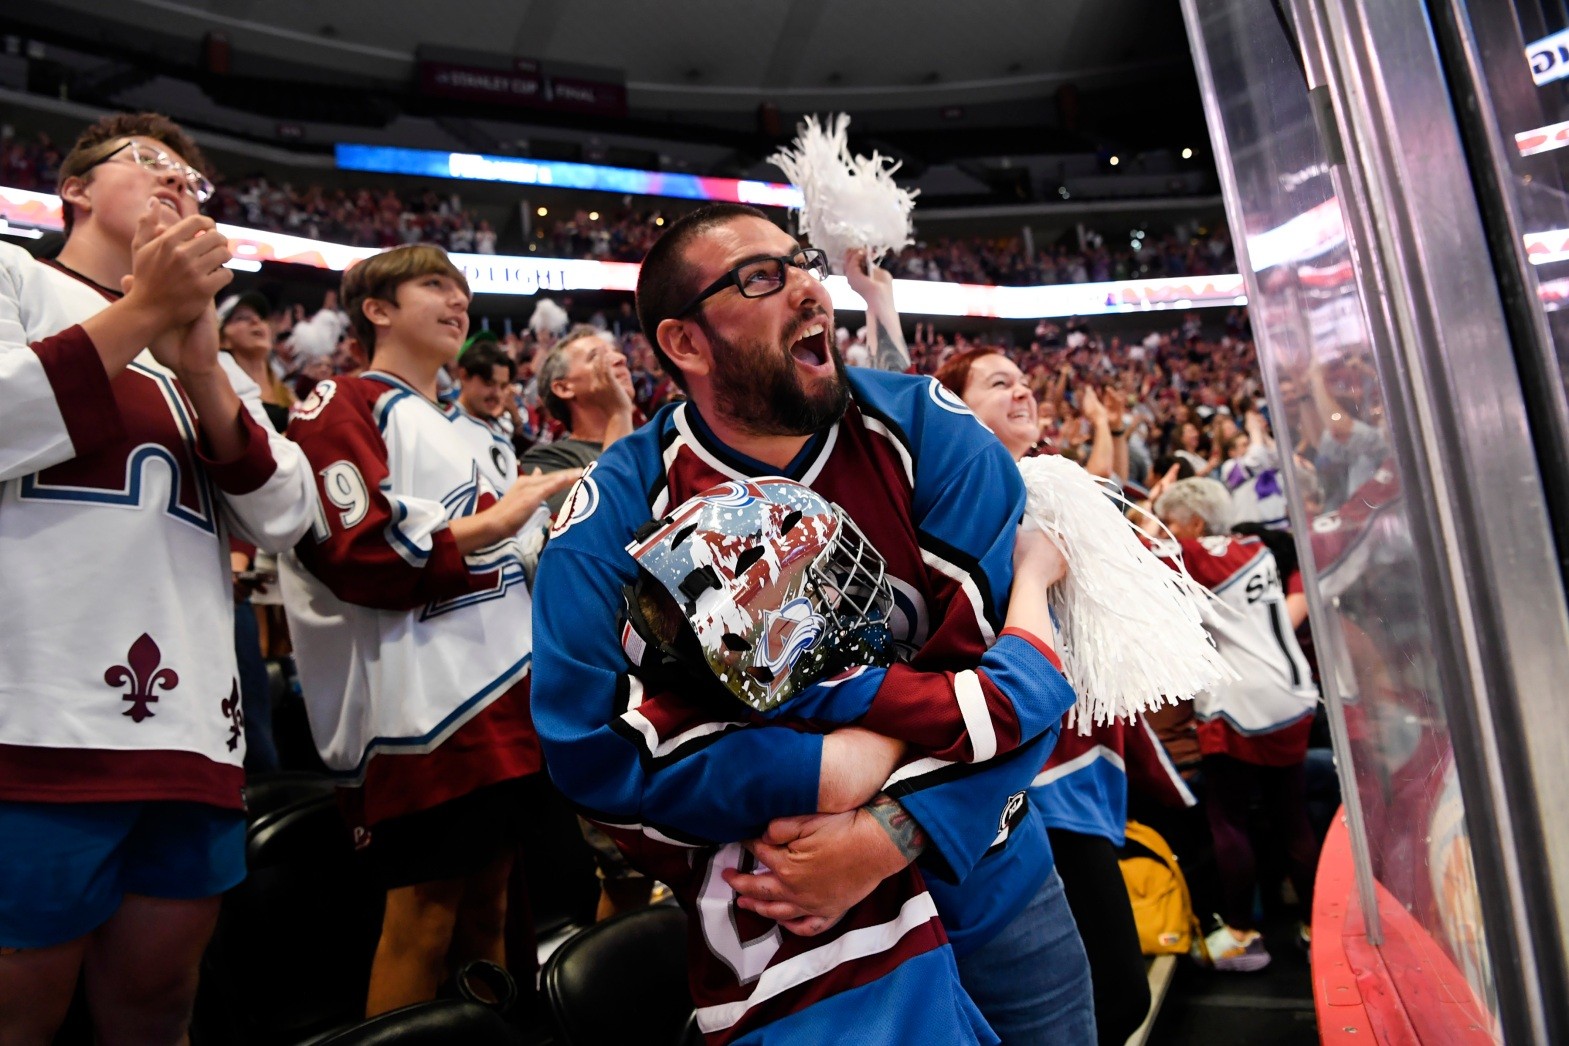 Avalanche Vs Lightning Live Updates And Highlights From Game 4 Of The Stanley Cup Final 